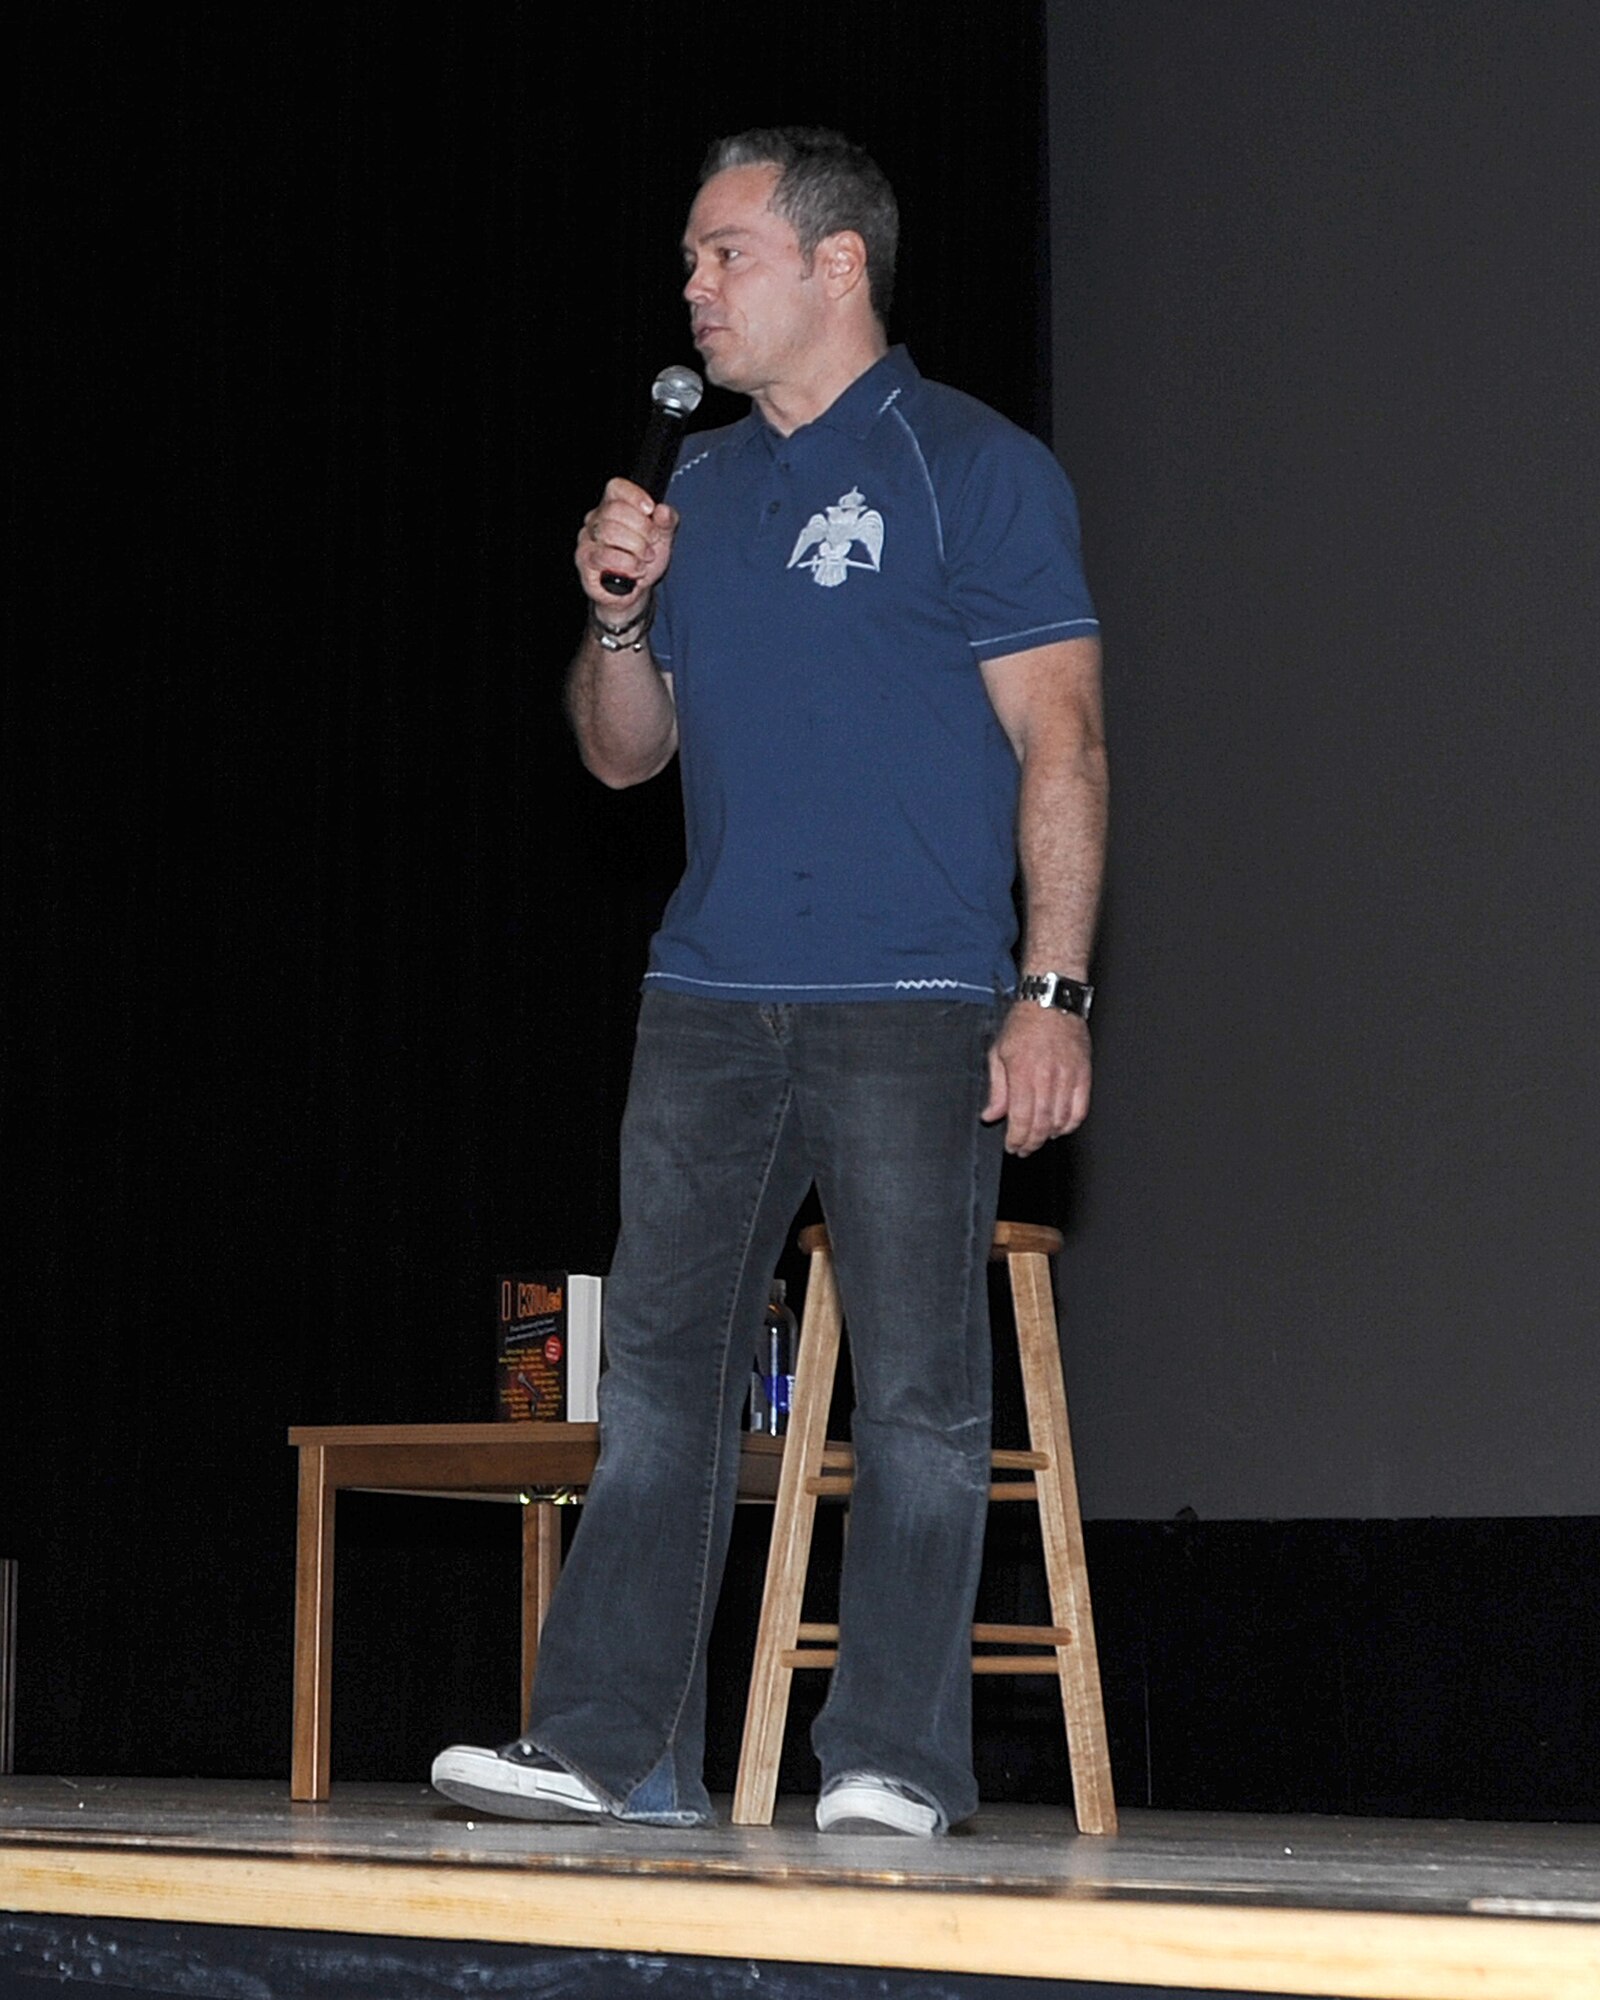 ELMENDORF AIR FORCE BASE, Alaska -- Comedian Bernie McGrenahan performs during his "Happy Hour" tour June 16. McGrenahan's show puts a comedic twist on Alchohol and Drug abuse prevention from his own personal life experiences. (U.S. Air Force photo/Airman 1st Class Kristin High)